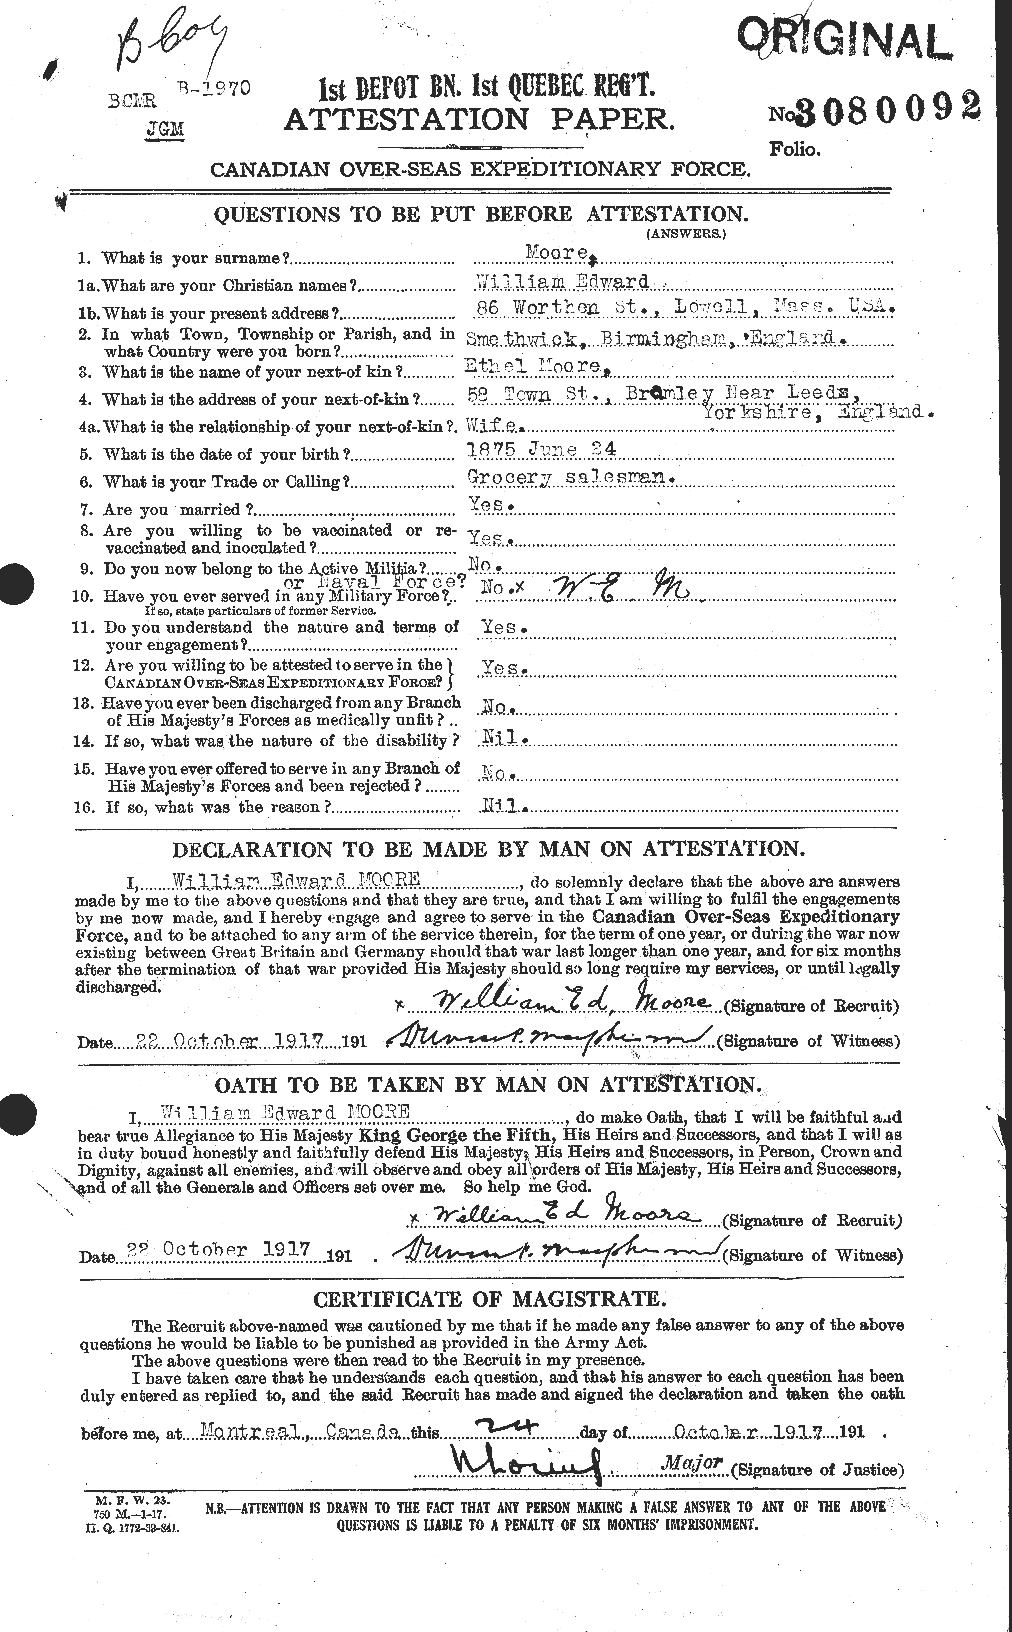 Personnel Records of the First World War - CEF 505790a